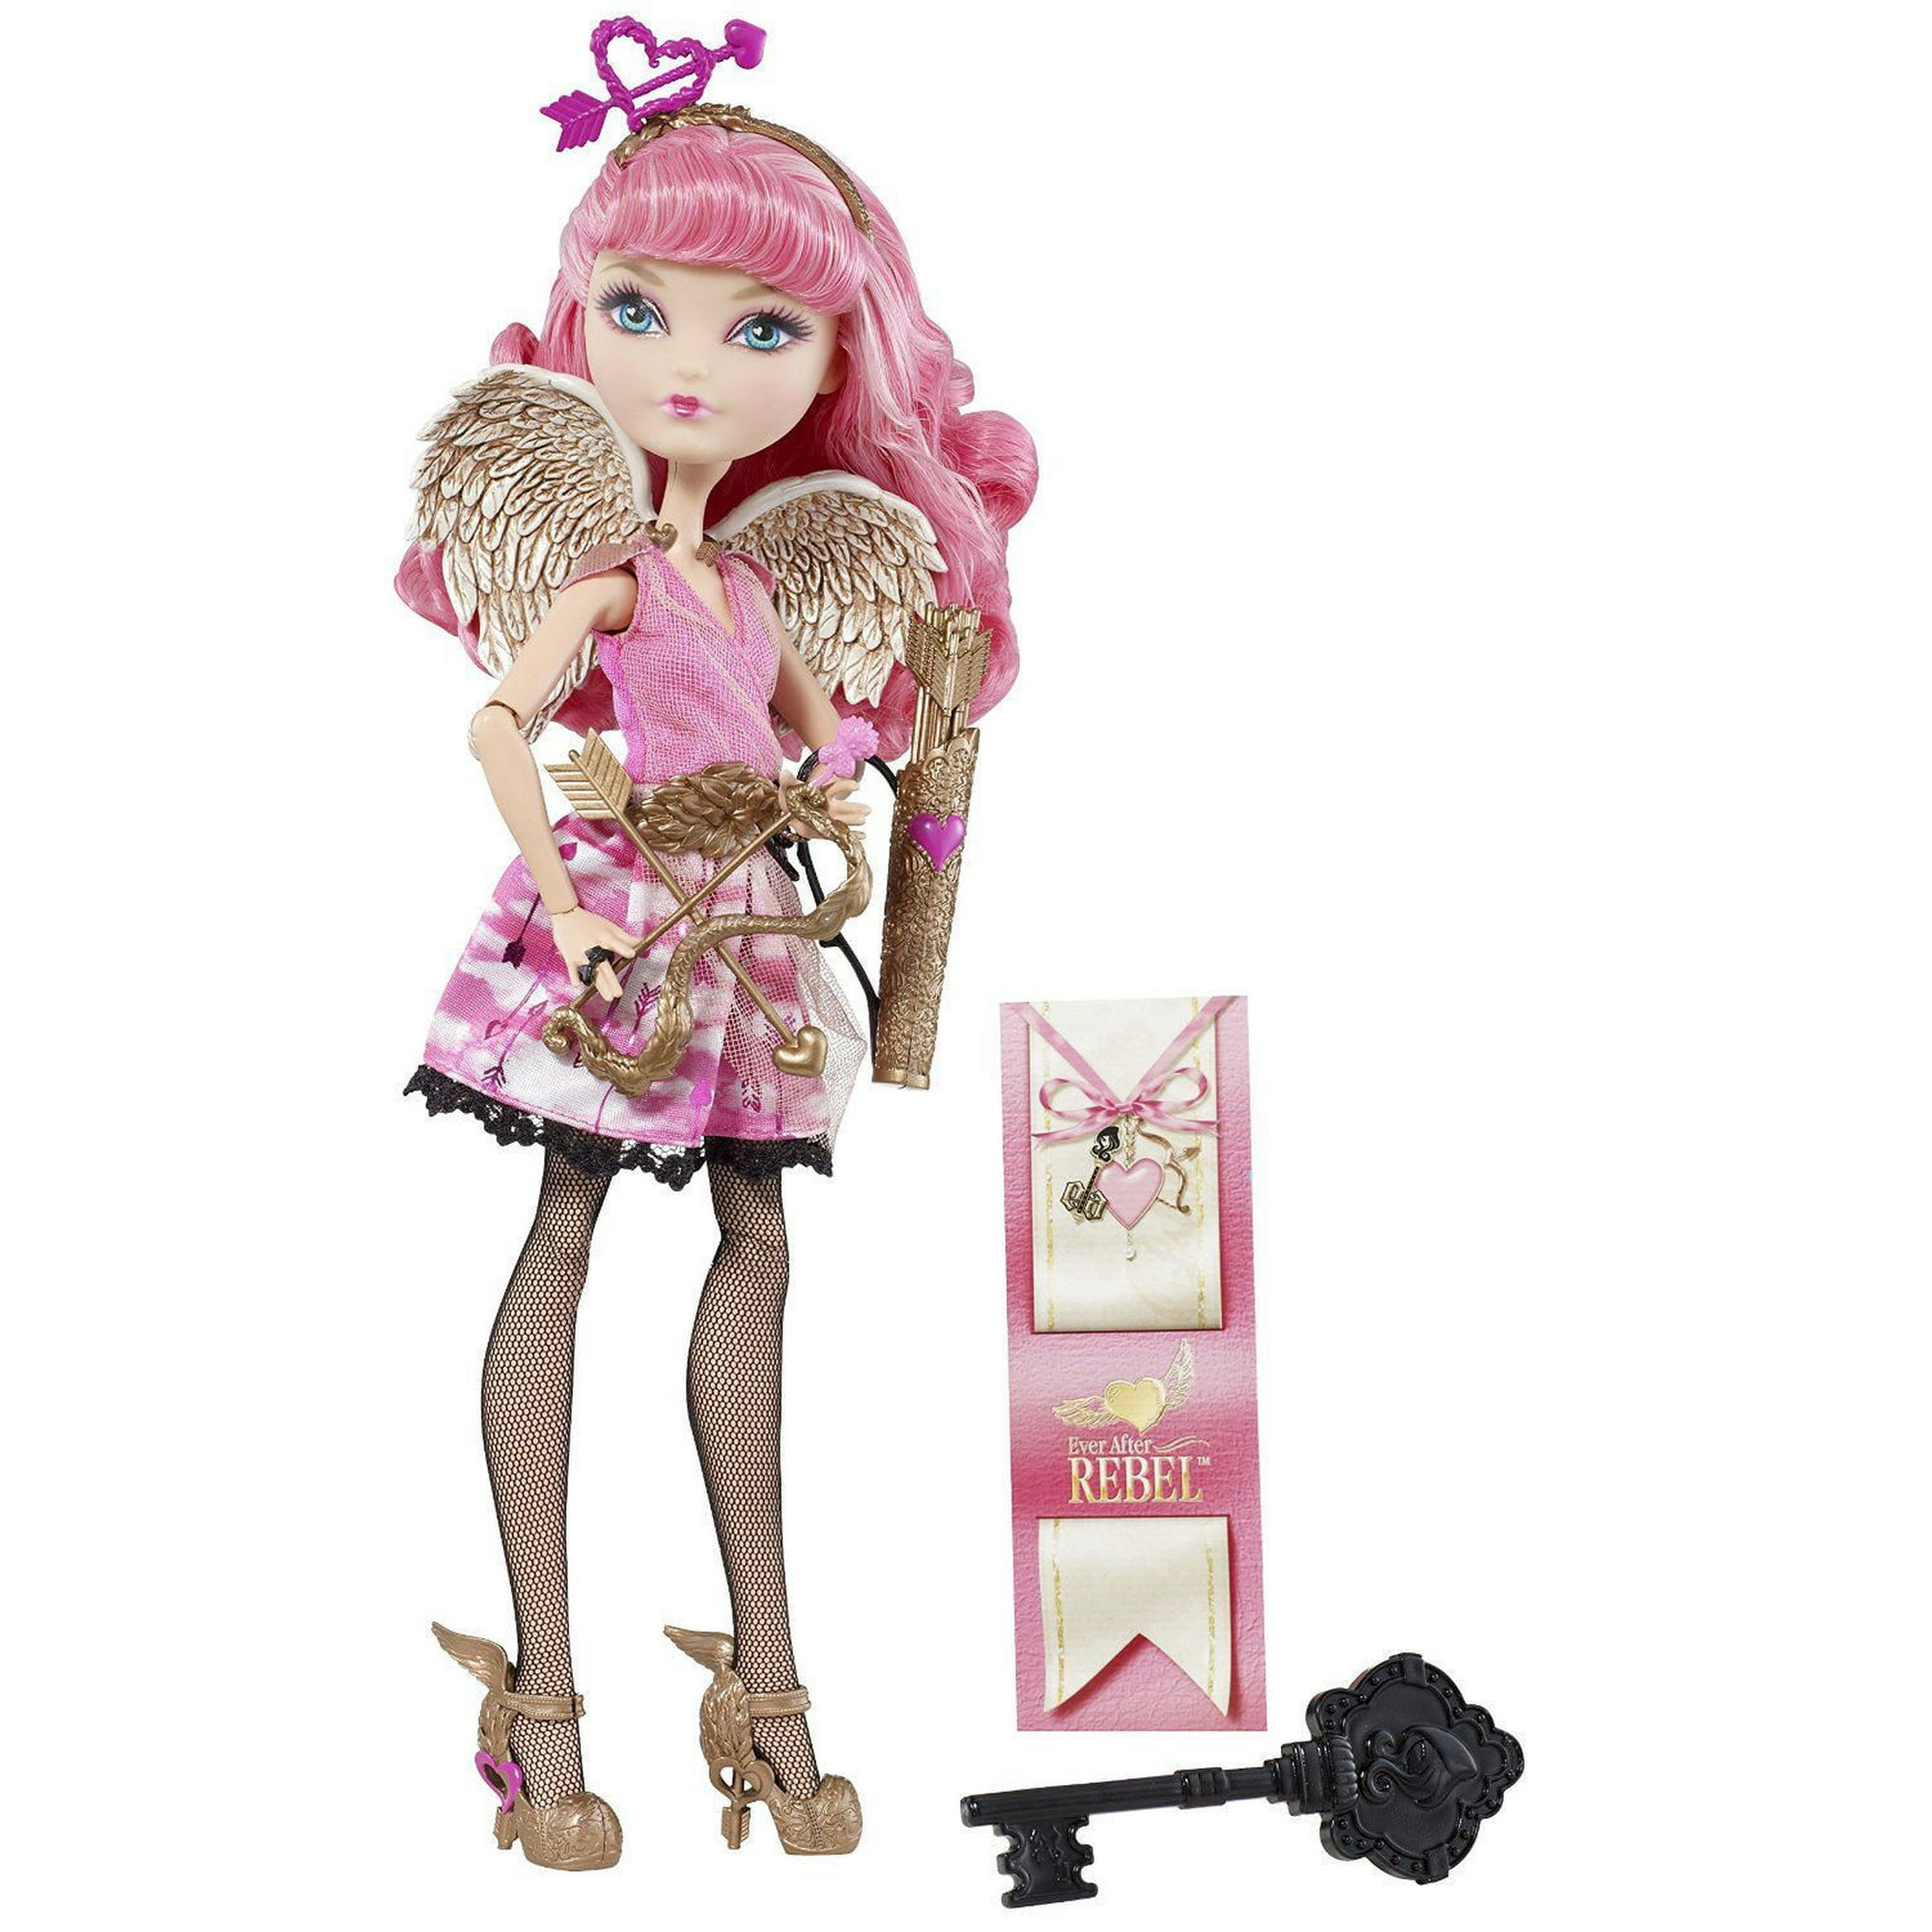 Ever After High C.A. Cupid Doll 